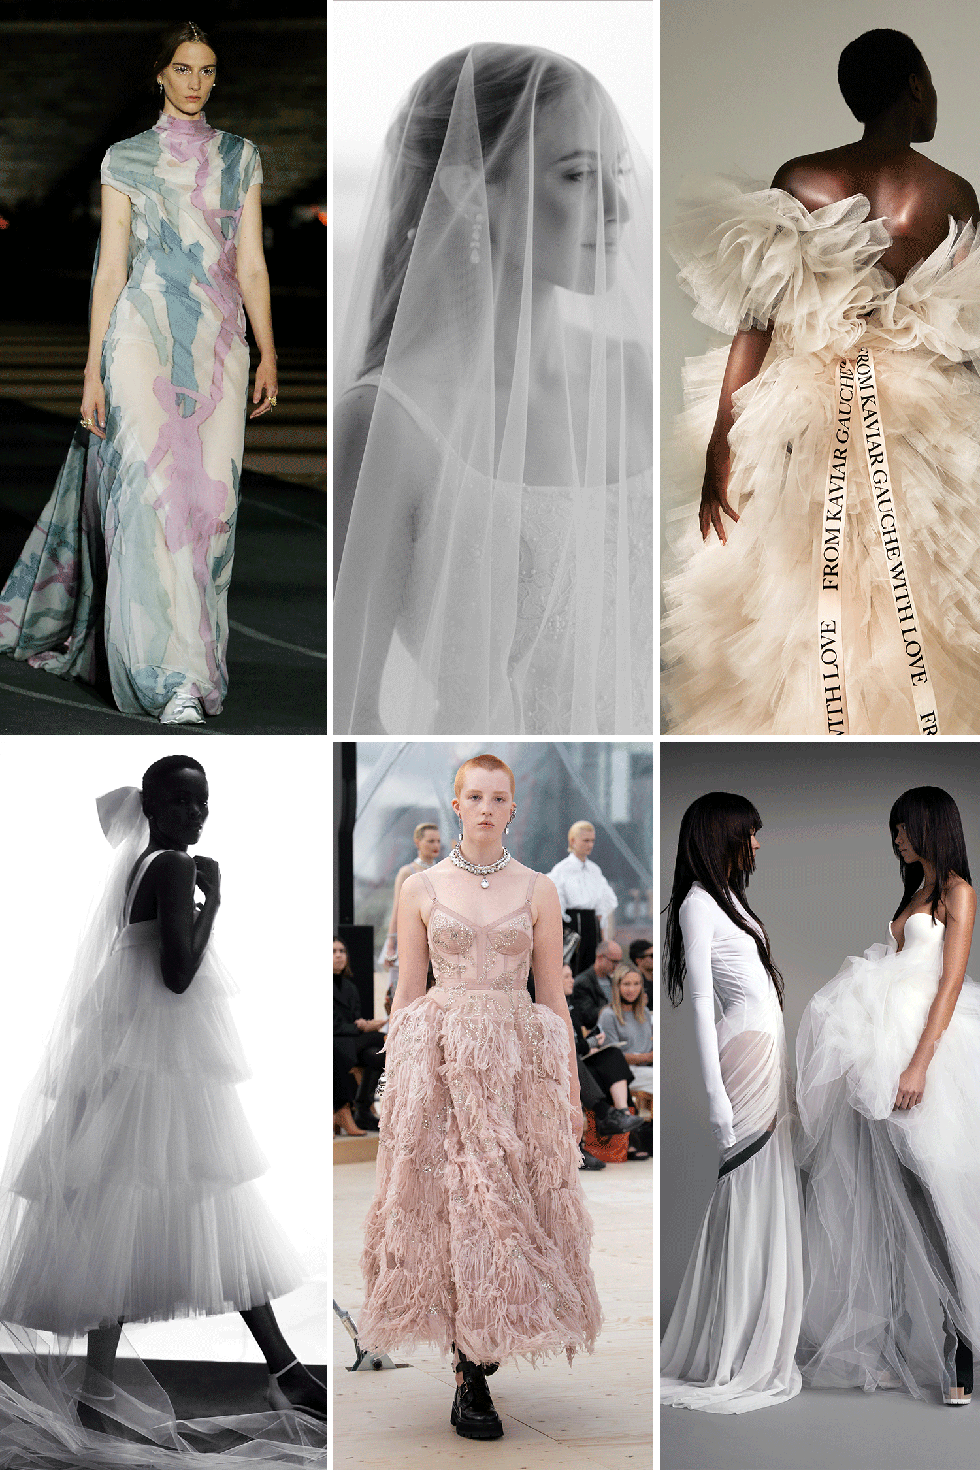 6 Wedding Dress Trends for 2022 to Know Now